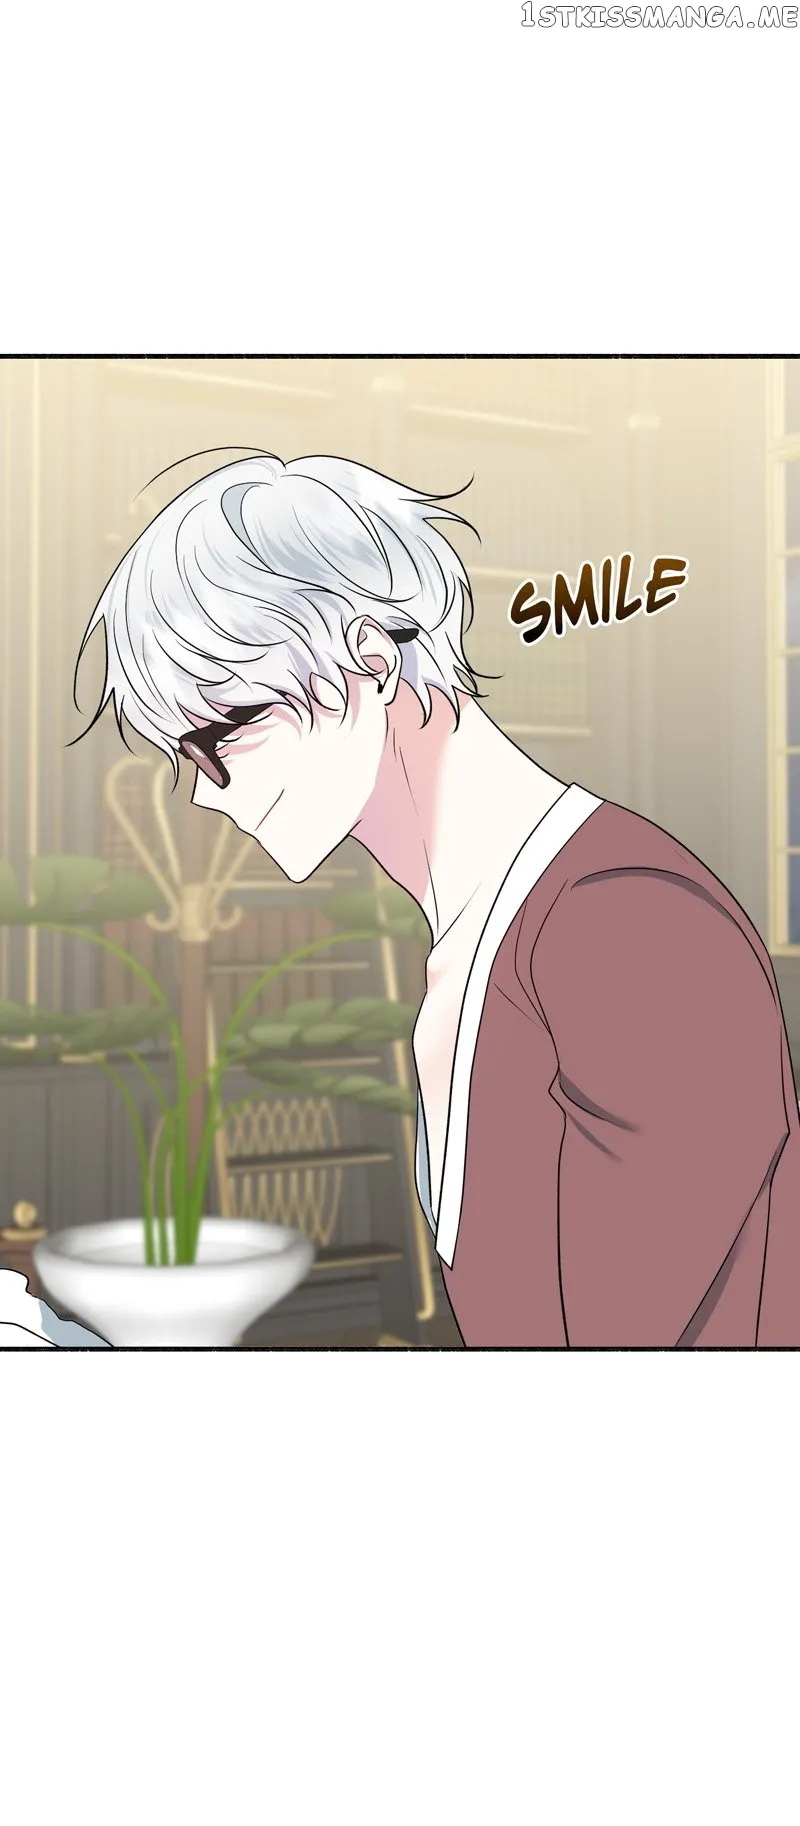 My Angelic Husband is actually a Devil in Disguise chapter 19